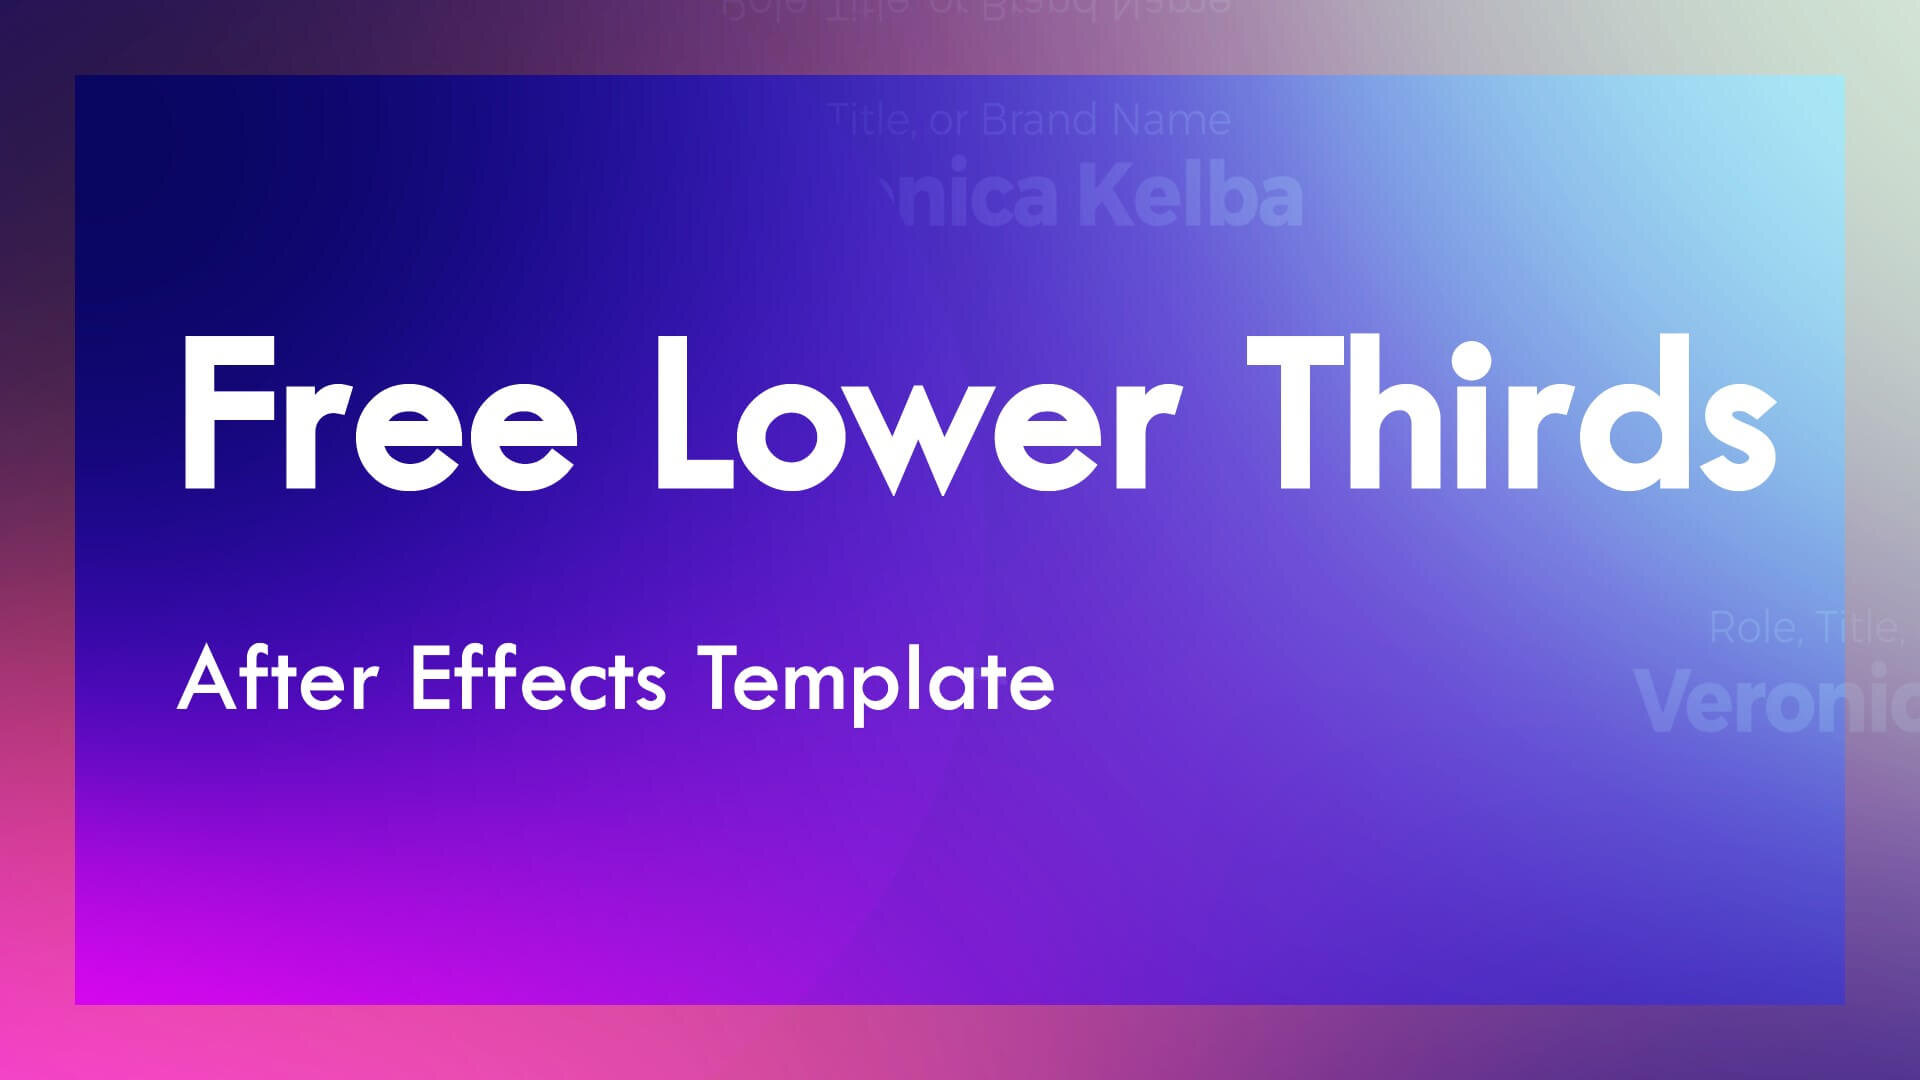 Free Lower Thirds After Effects Template